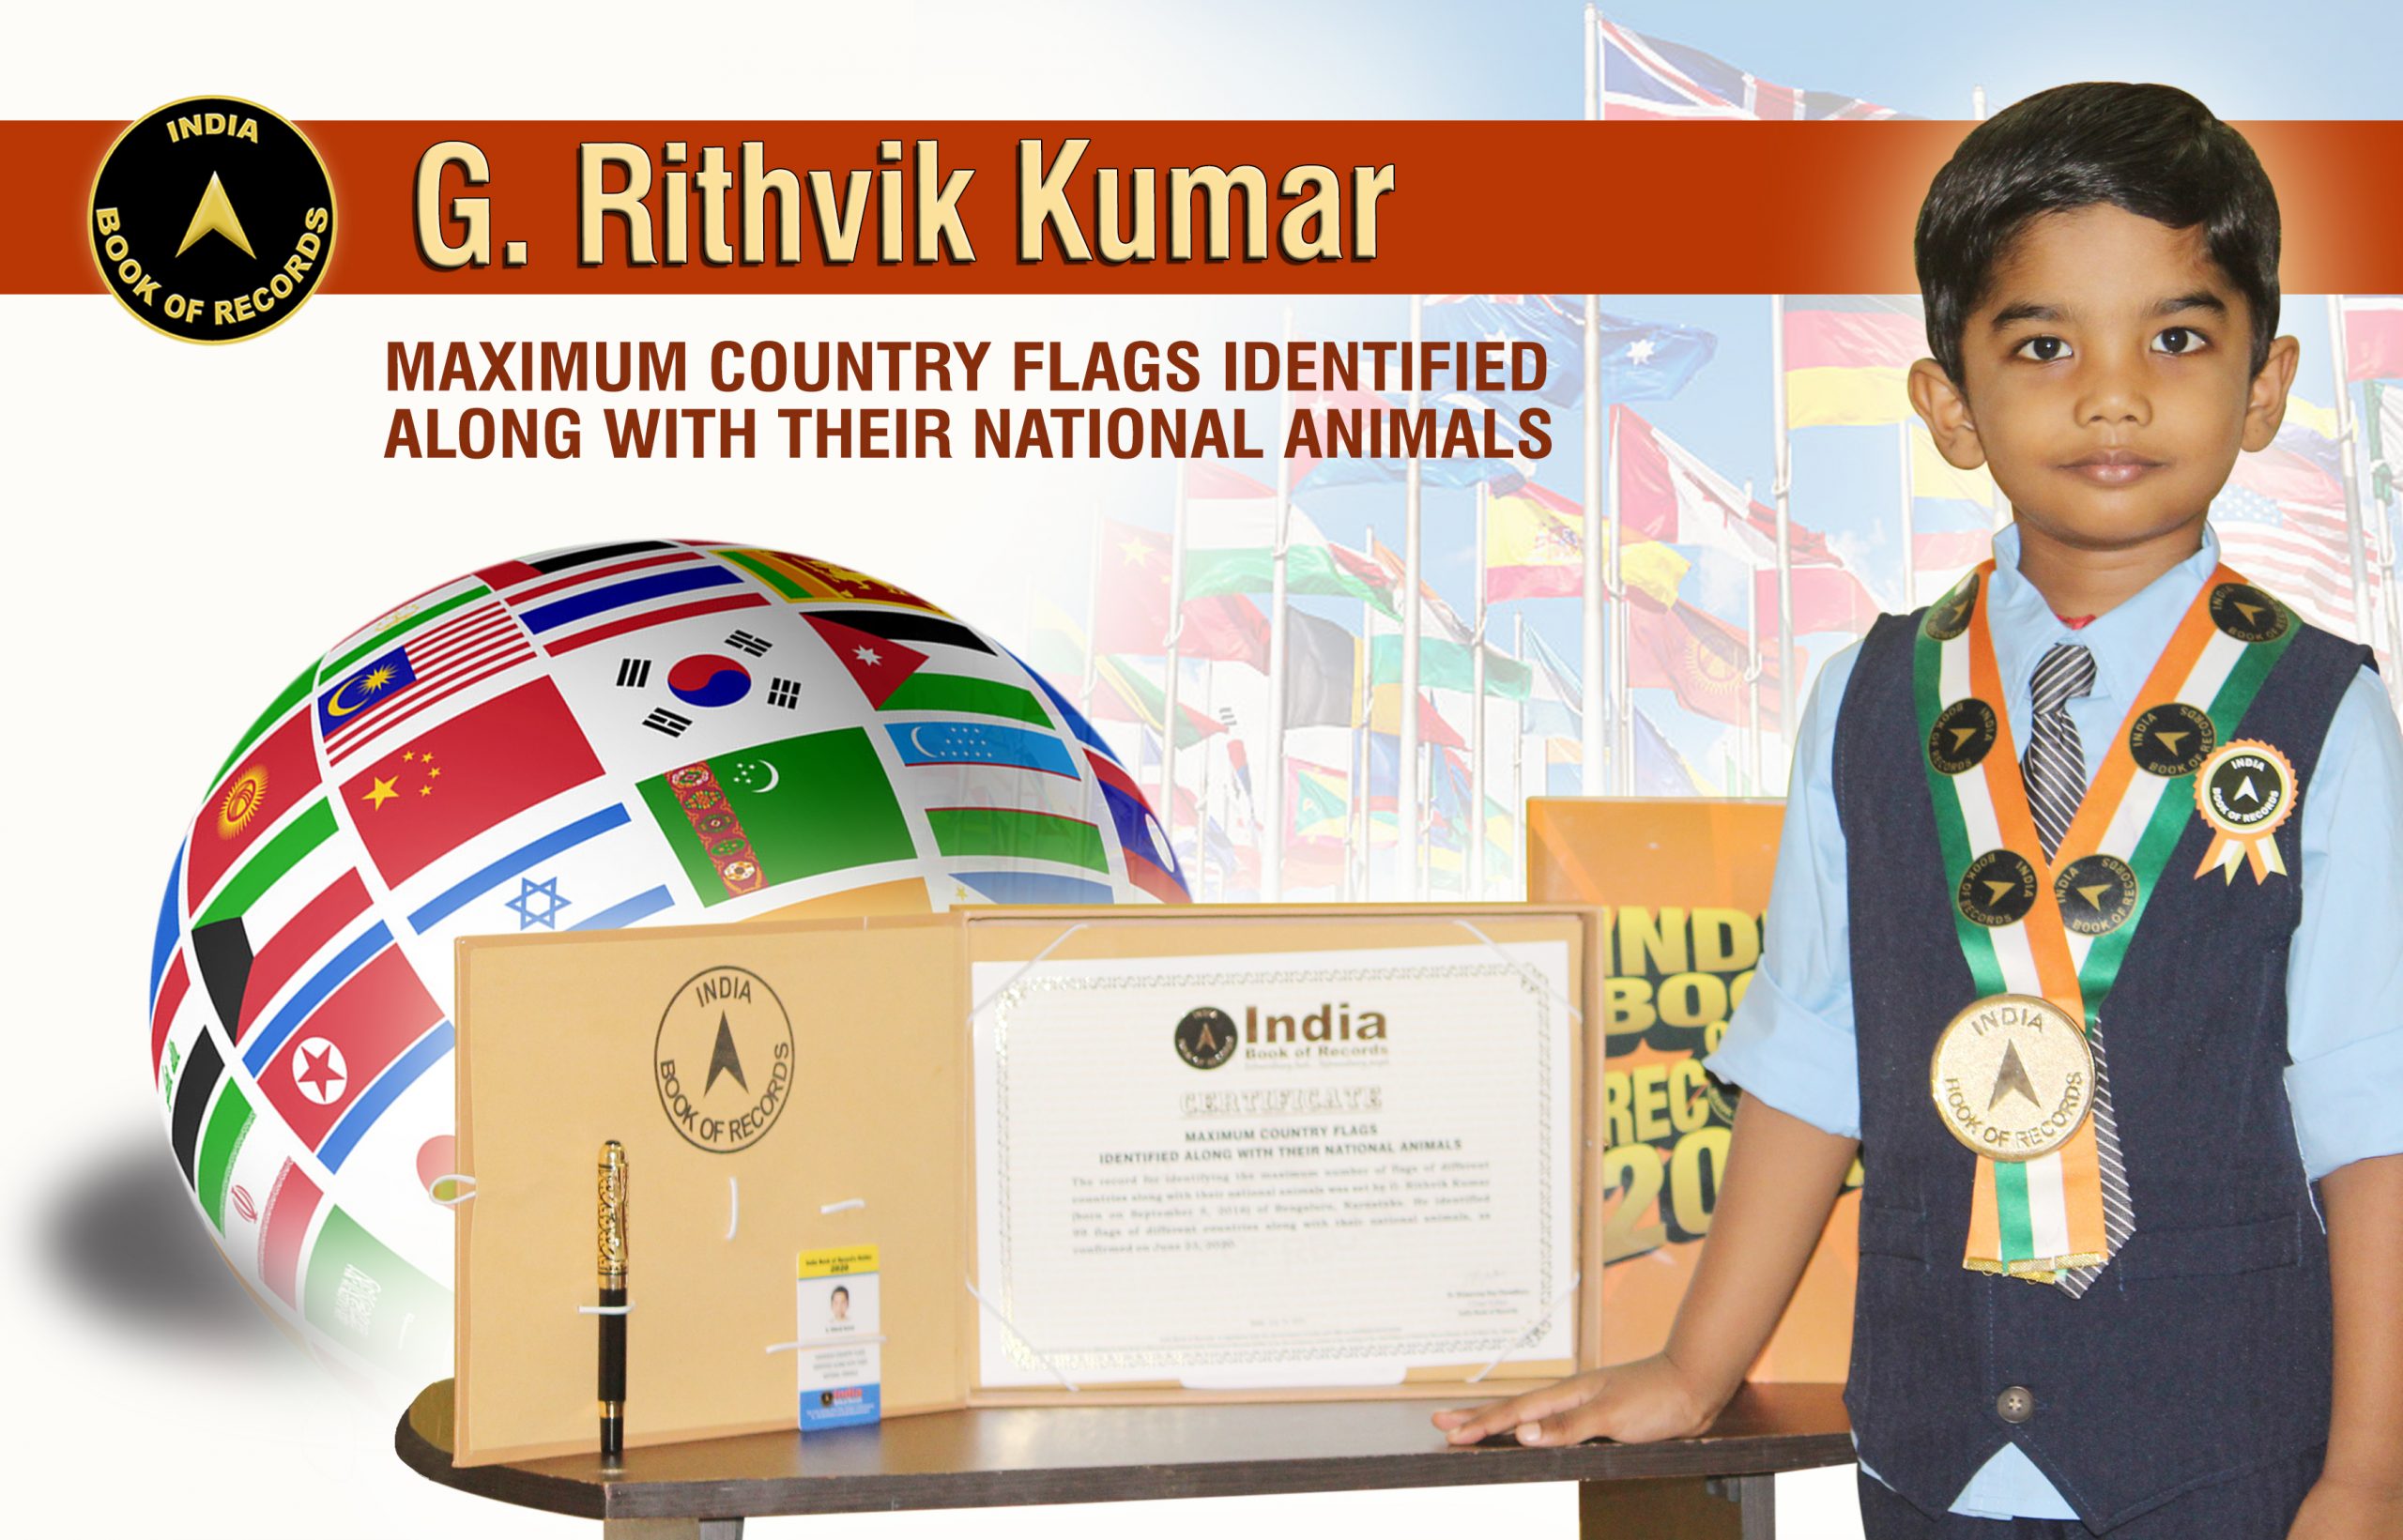 MAXIMUM COUNTRY FLAGS IDENTIFIED ALONG WITH THEIR NATIONAL ANIMALS